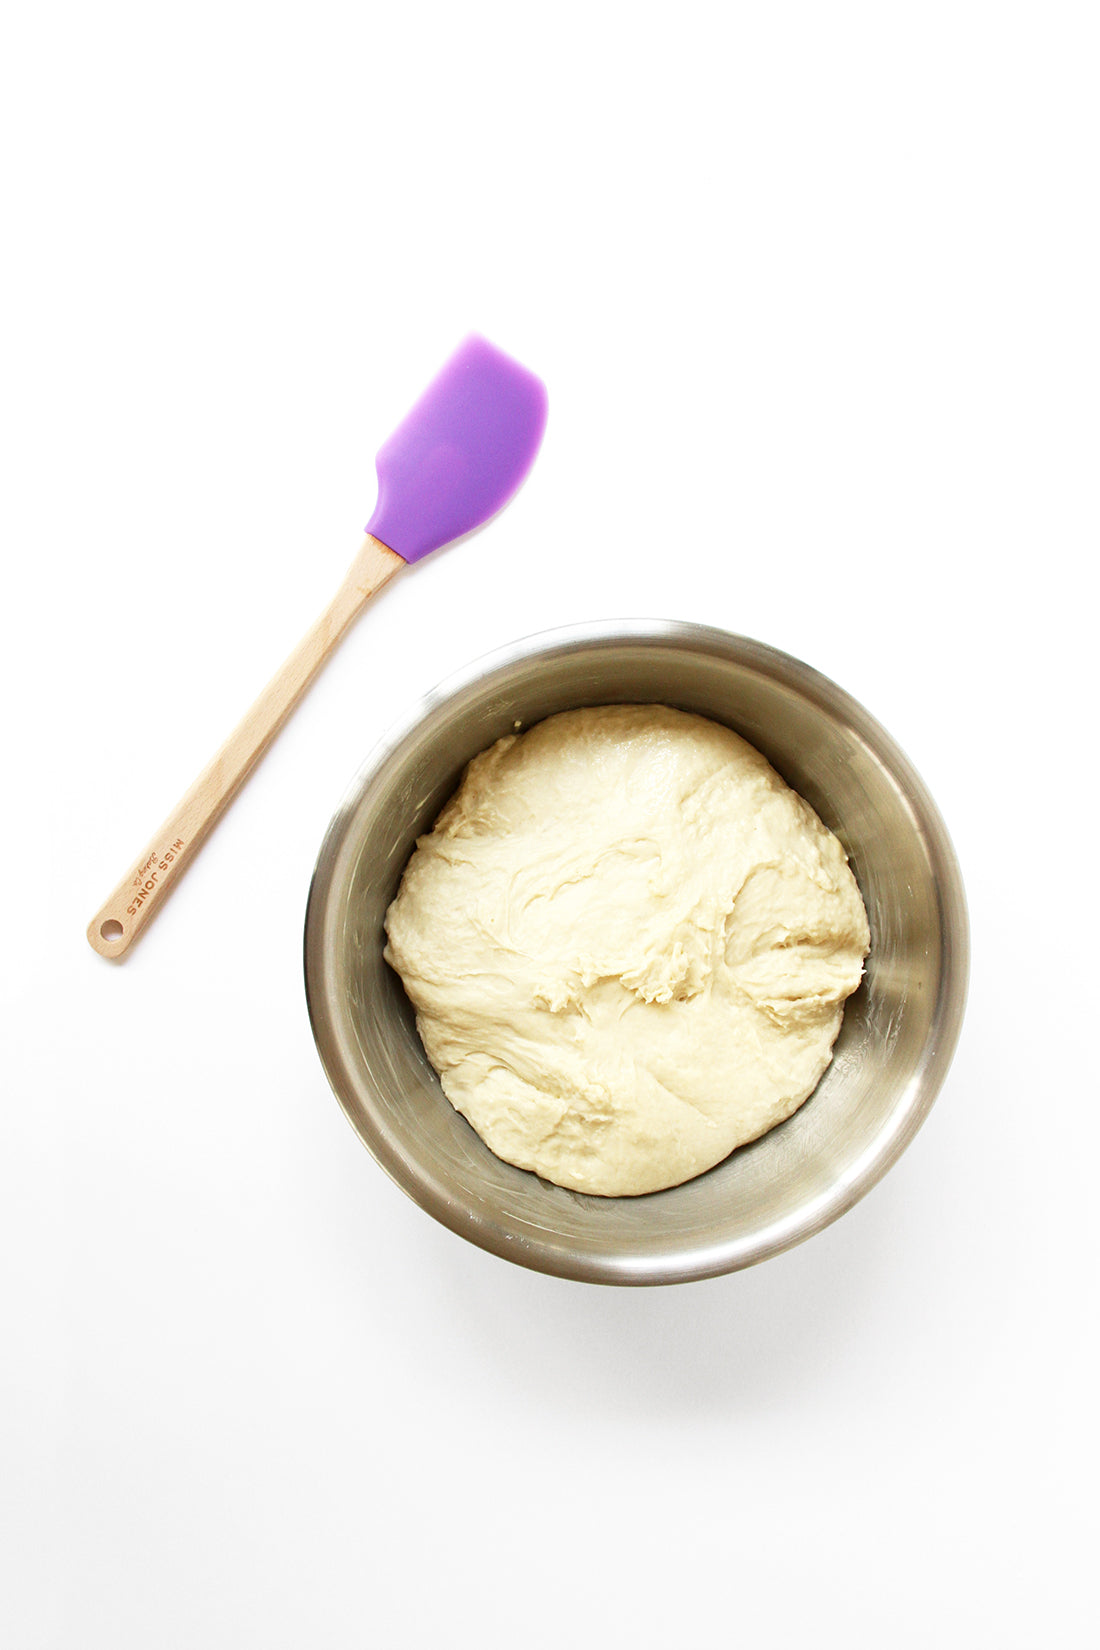 Image of dough used for Miss Jones Baking Co Cake Mix Cinnamon Rolls Recipe in mixing bowl next to a purple spatula